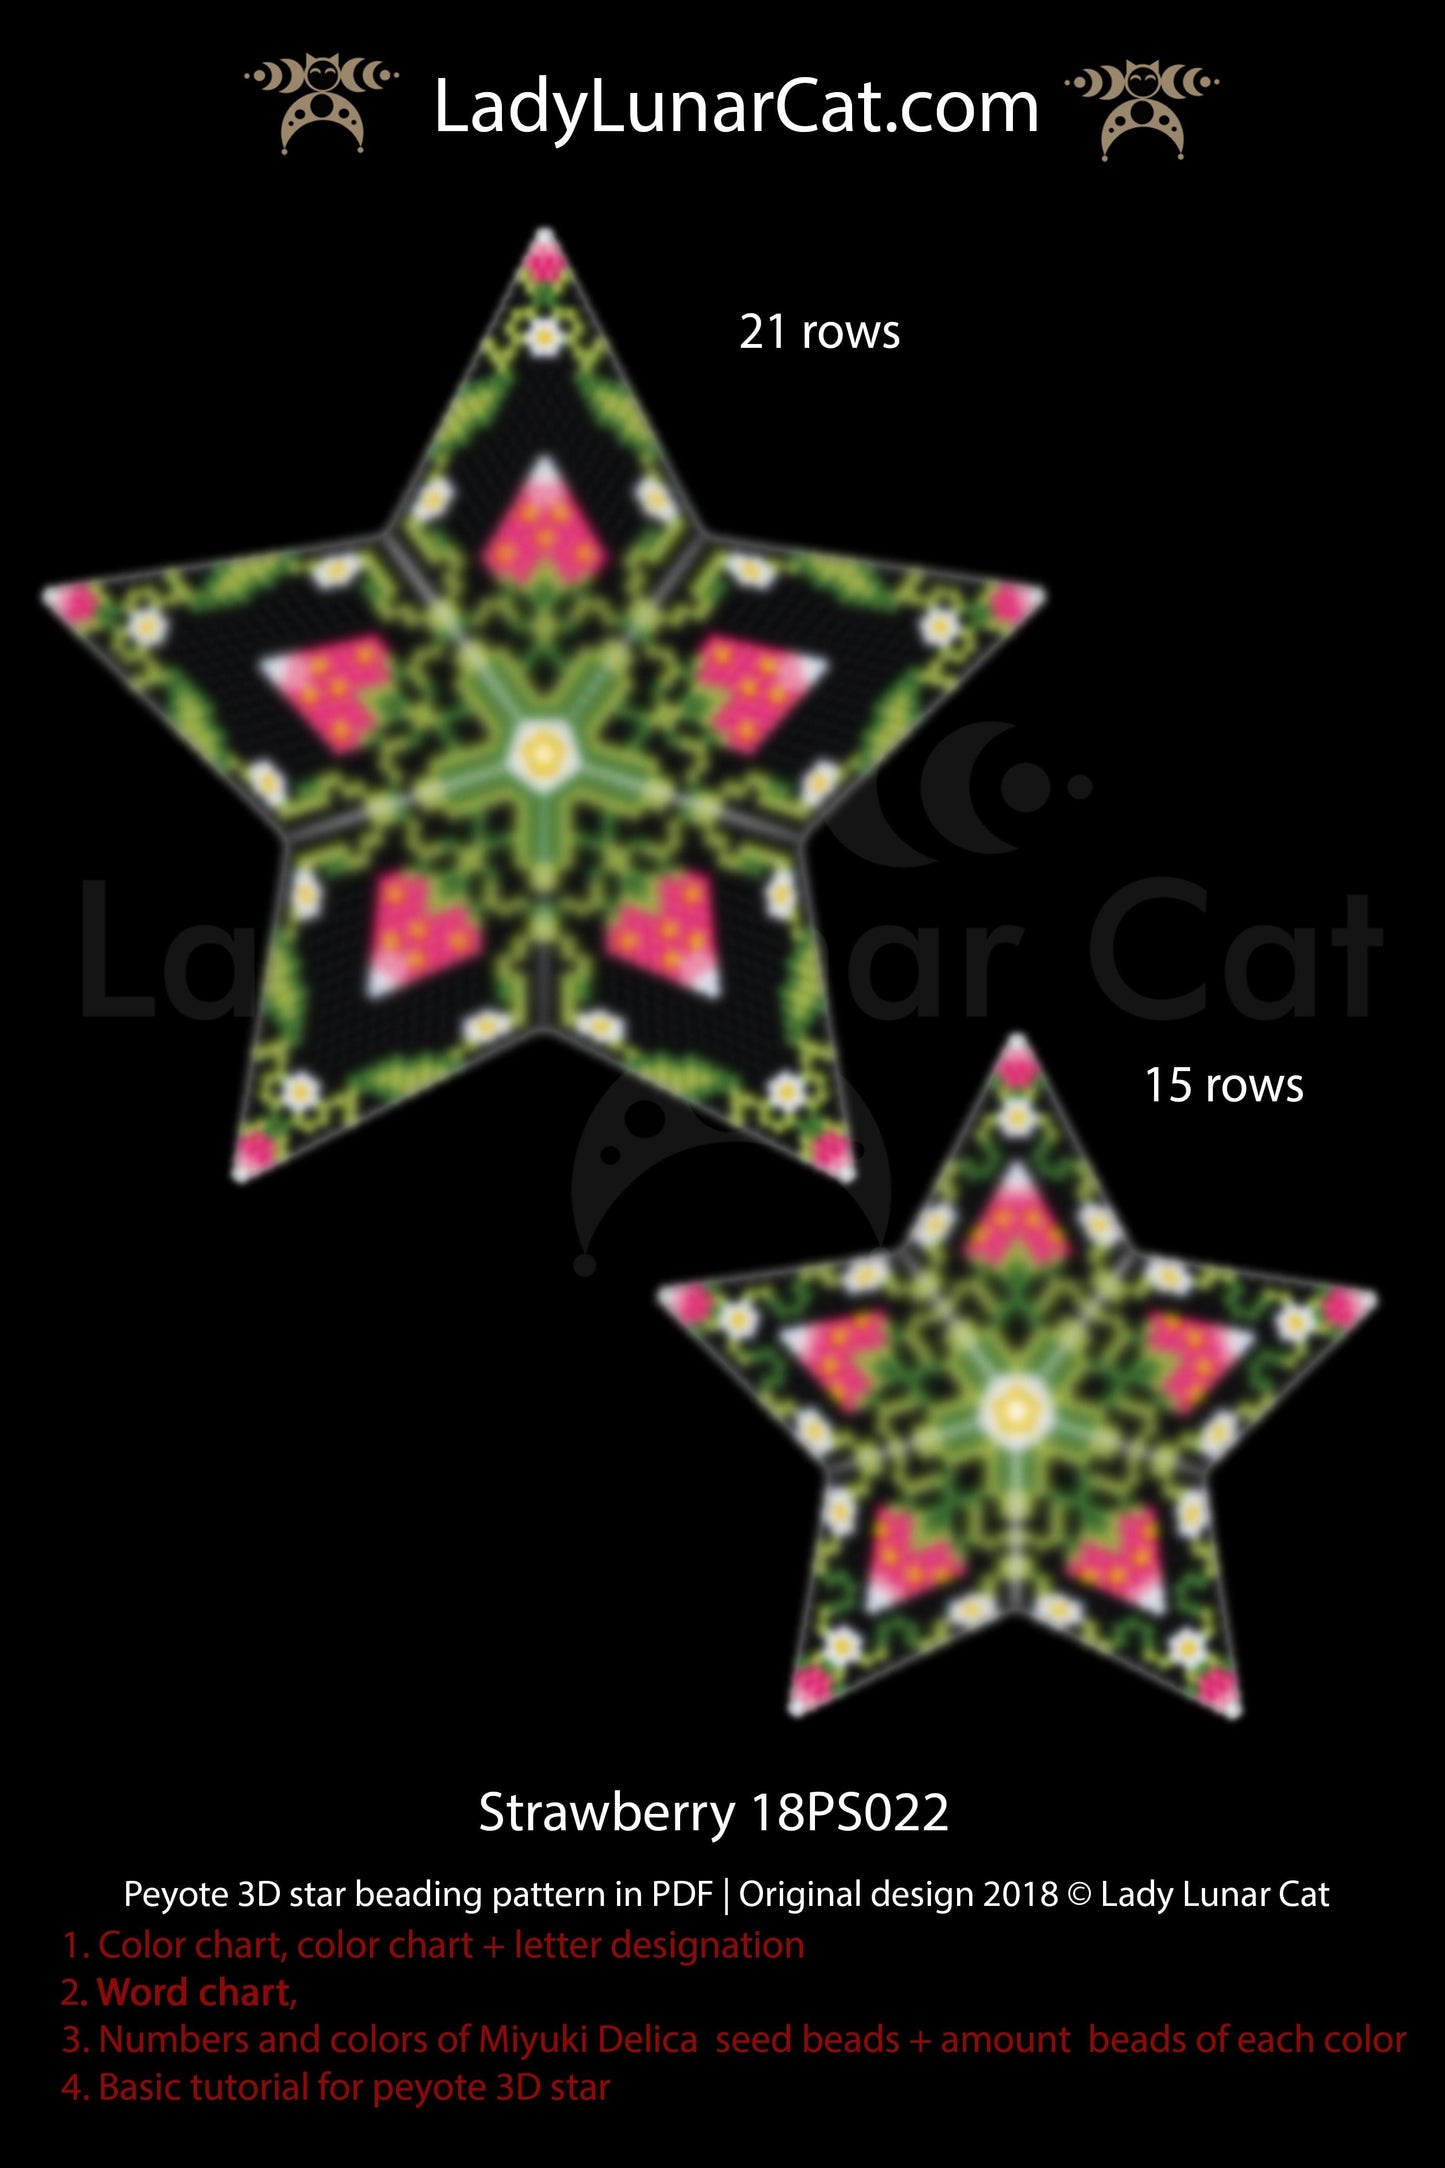 Beaded star pattern - Strawberry 18PS022 | Seed beads tutorial for 3D peyote star LadyLunarCat